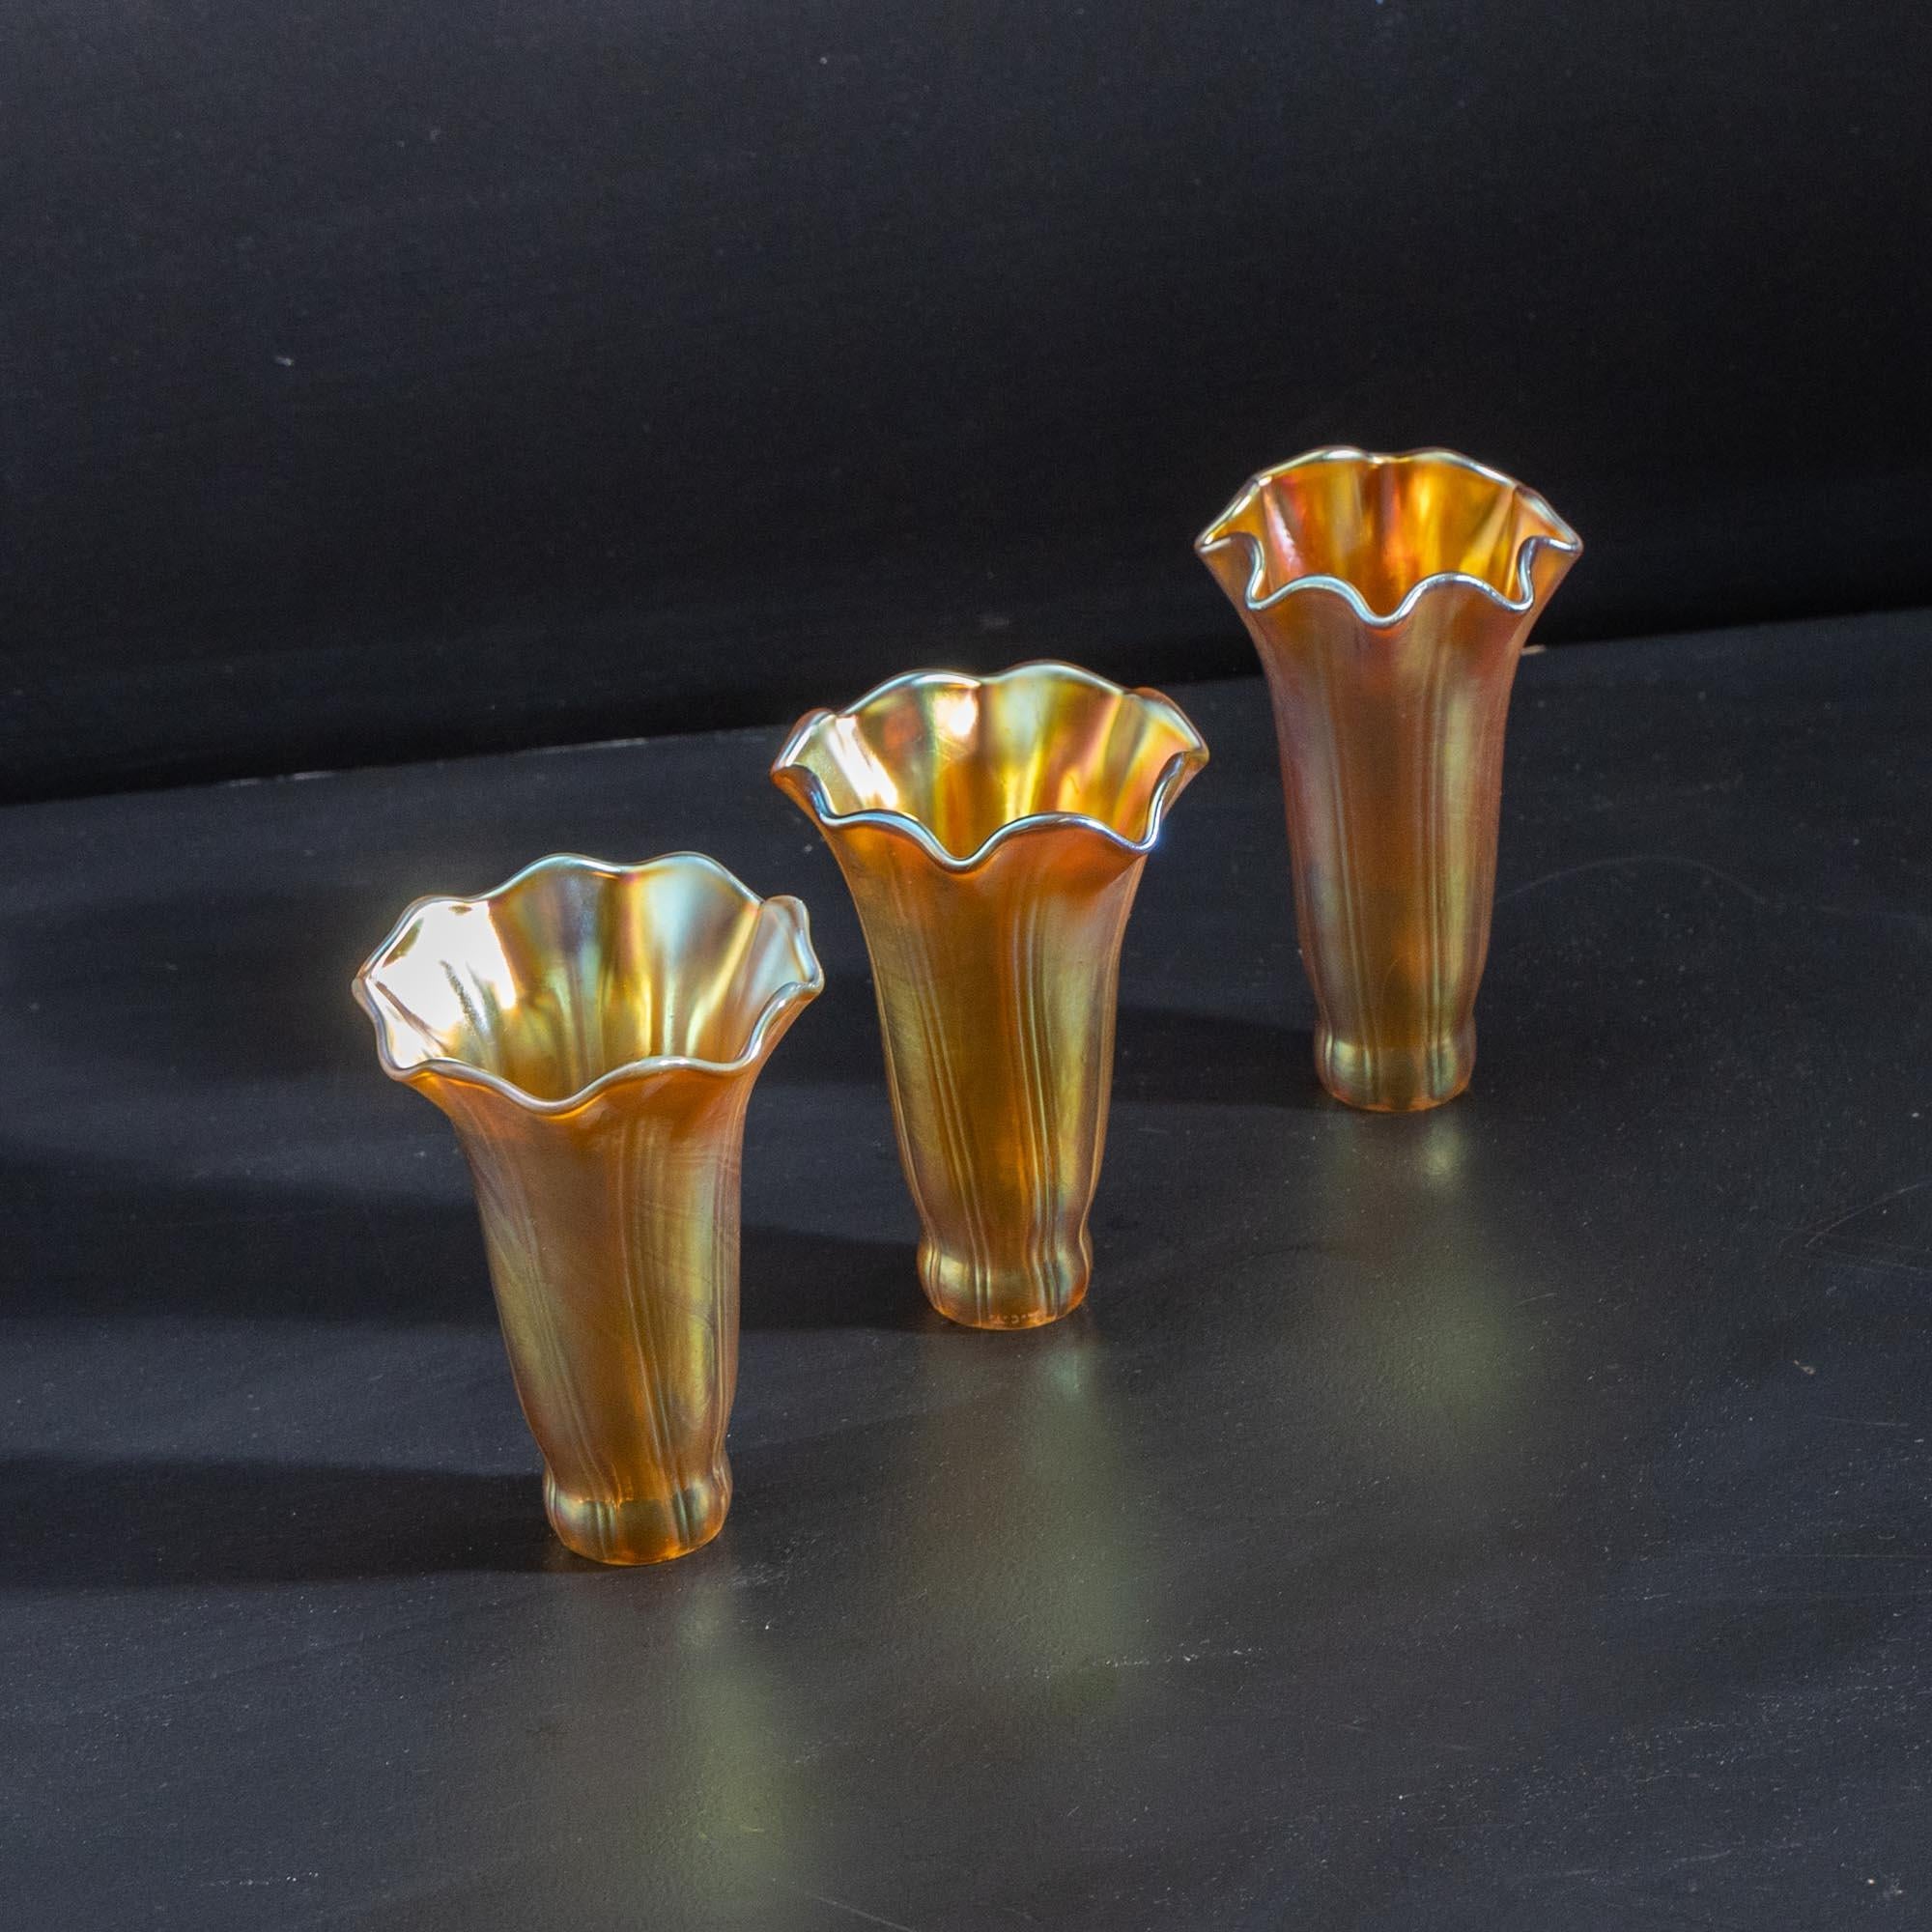 Three Tiffany Glass lampshades as spare parts, model Lily, with a lower diameter of 3 cm and an upper diameter of 8 cm. 
Two are the same style, one is slightly more angular and ends in pointier leaves. 